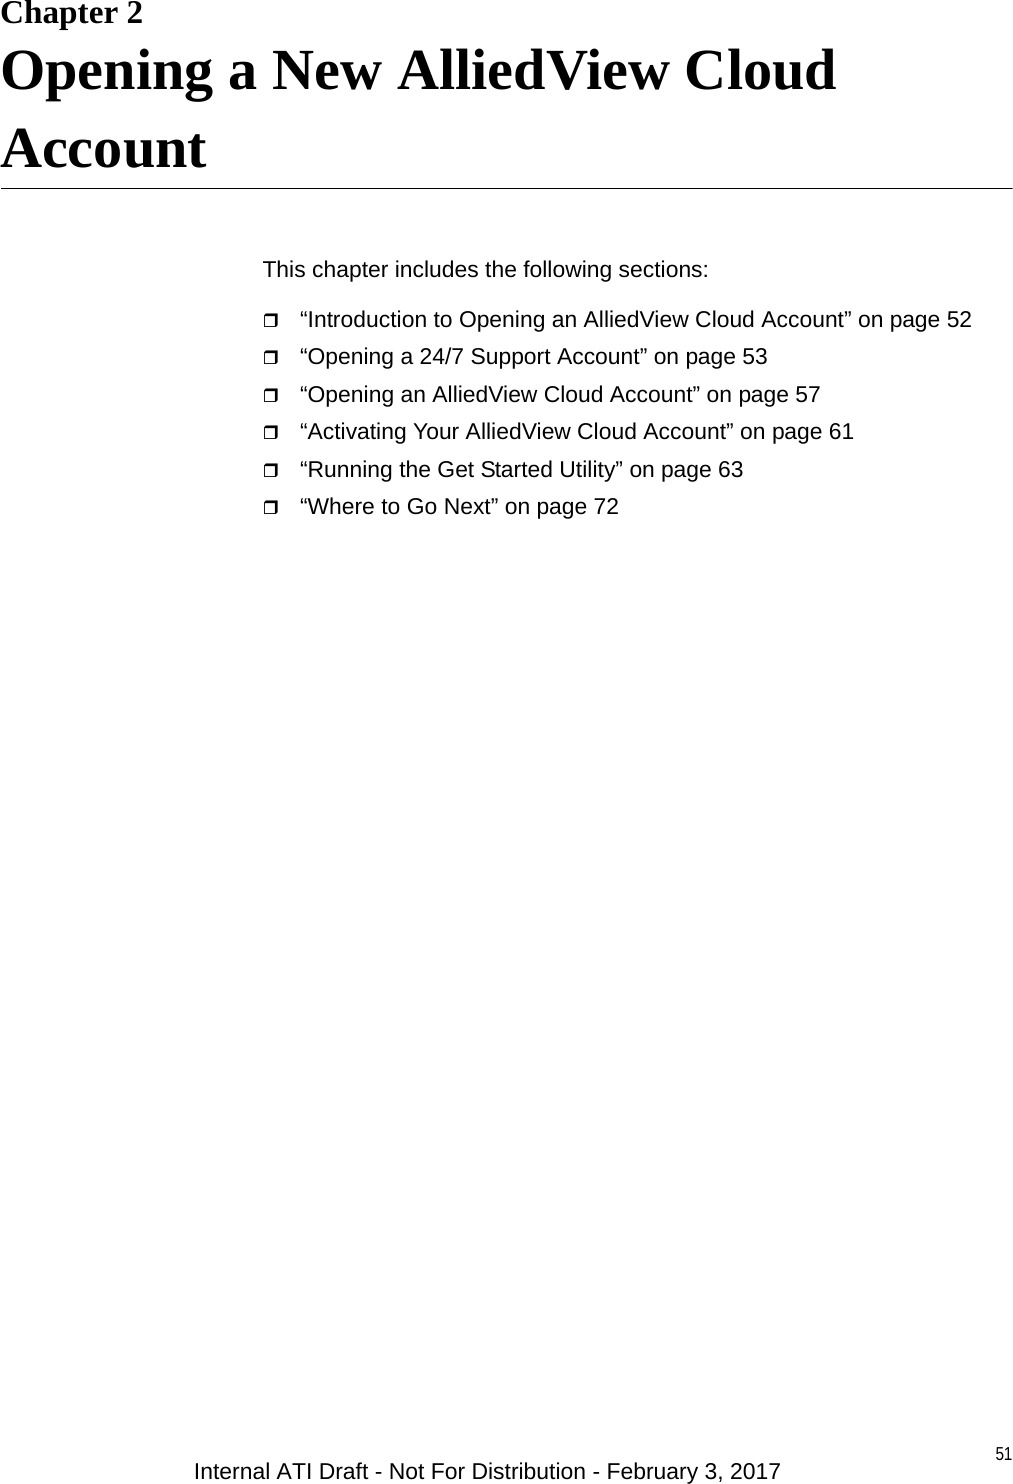 51Chapter 2Opening a New AlliedView Cloud AccountThis chapter includes the following sections:“Introduction to Opening an AlliedView Cloud Account” on page 52“Opening a 24/7 Support Account” on page 53“Opening an AlliedView Cloud Account” on page 57“Activating Your AlliedView Cloud Account” on page 61“Running the Get Started Utility” on page 63“Where to Go Next” on page 72Internal ATI Draft - Not For Distribution - February 3, 2017